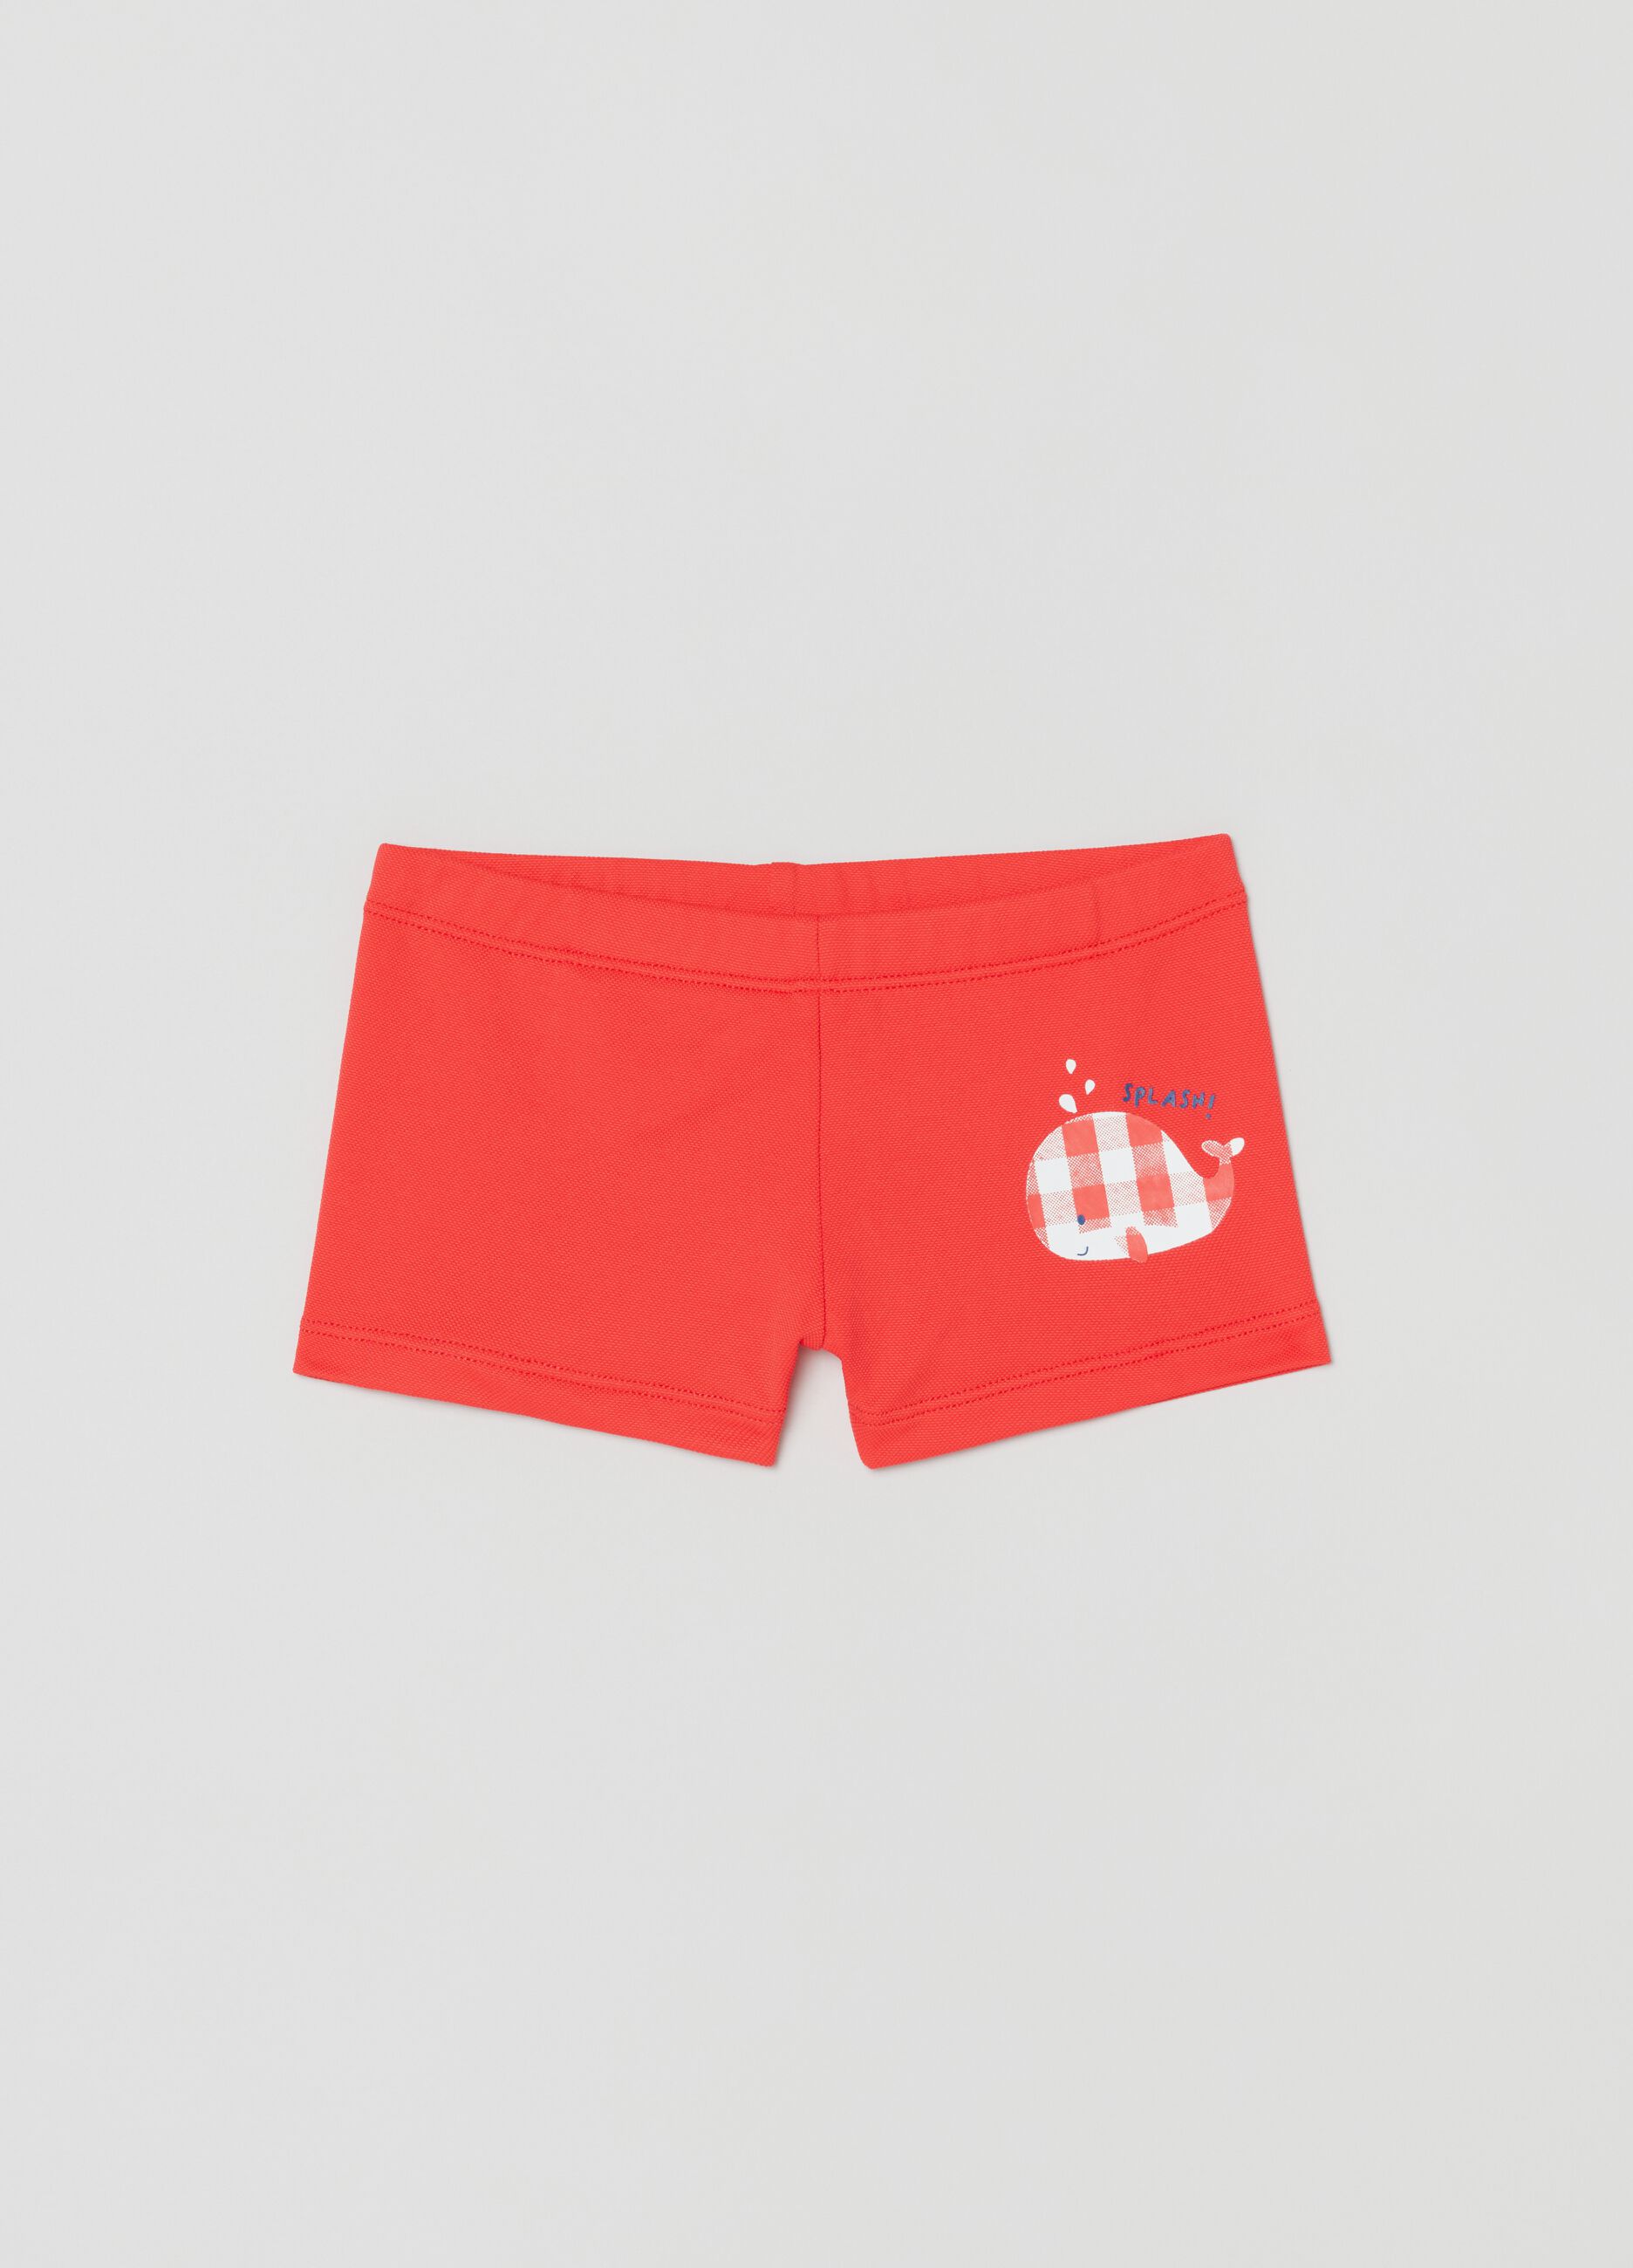 Swimming trunks with whale print